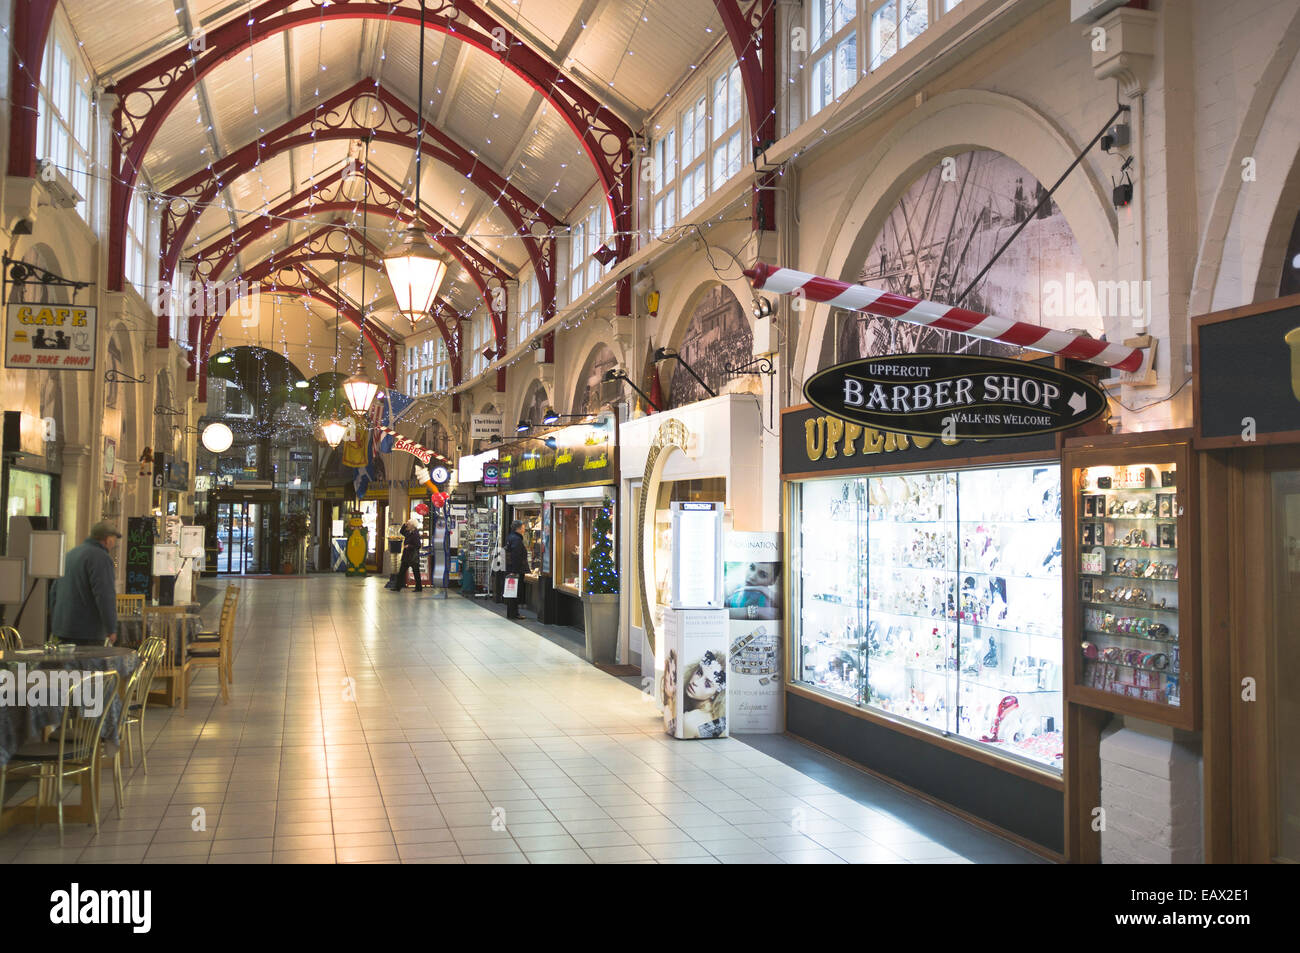 dh Victorian market INVERNESS INVERNESSSHIRE Interior of old shopping mall building shops uk arcade Stock Photo